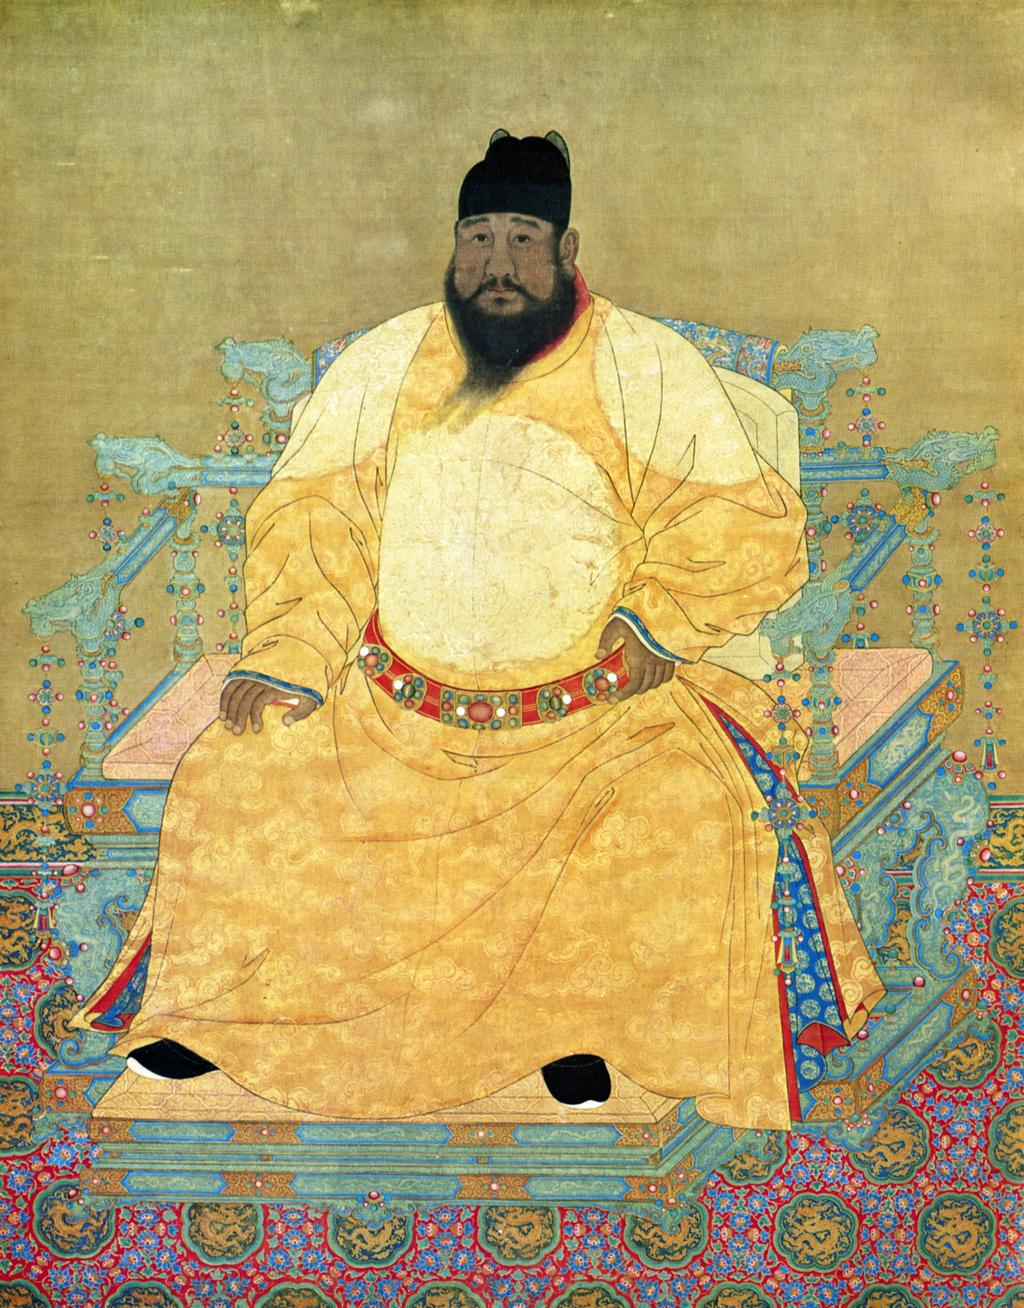 Ming Dynasty (1368-1644) Restored the civil service system Innovation was not encouraged Early Emperors encouraged maritime